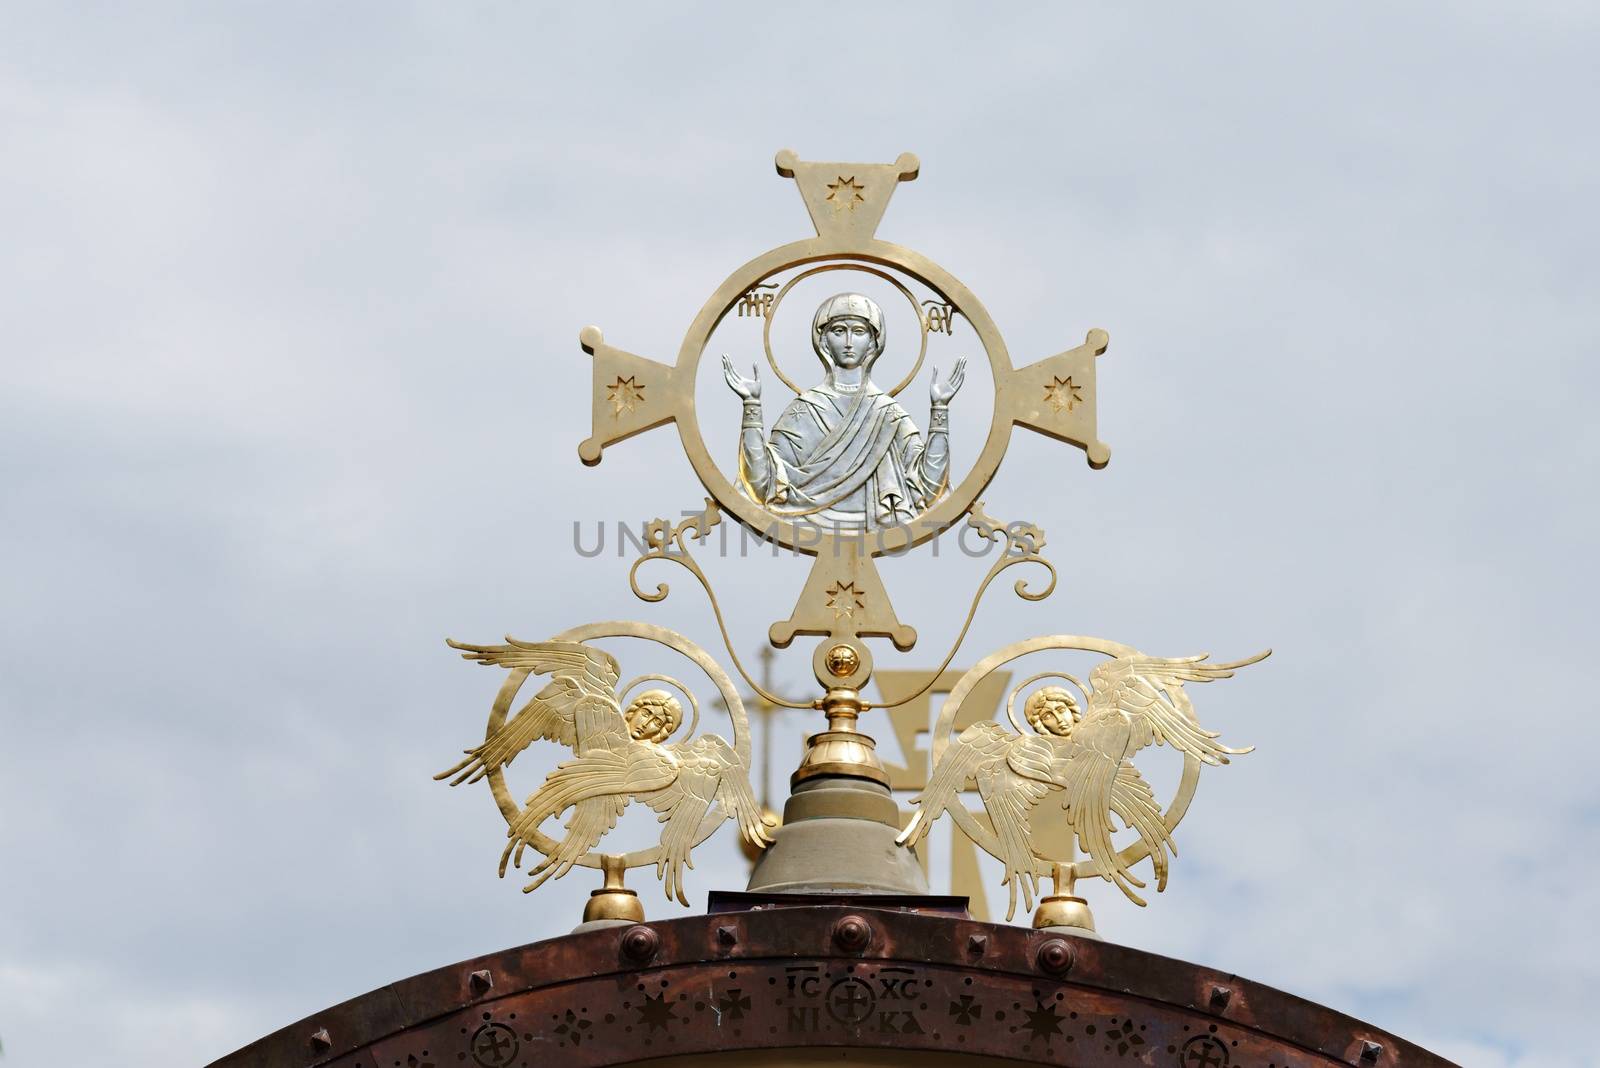 Cross on Orthodox church with Mother Mary and two angels on cloudy sky background